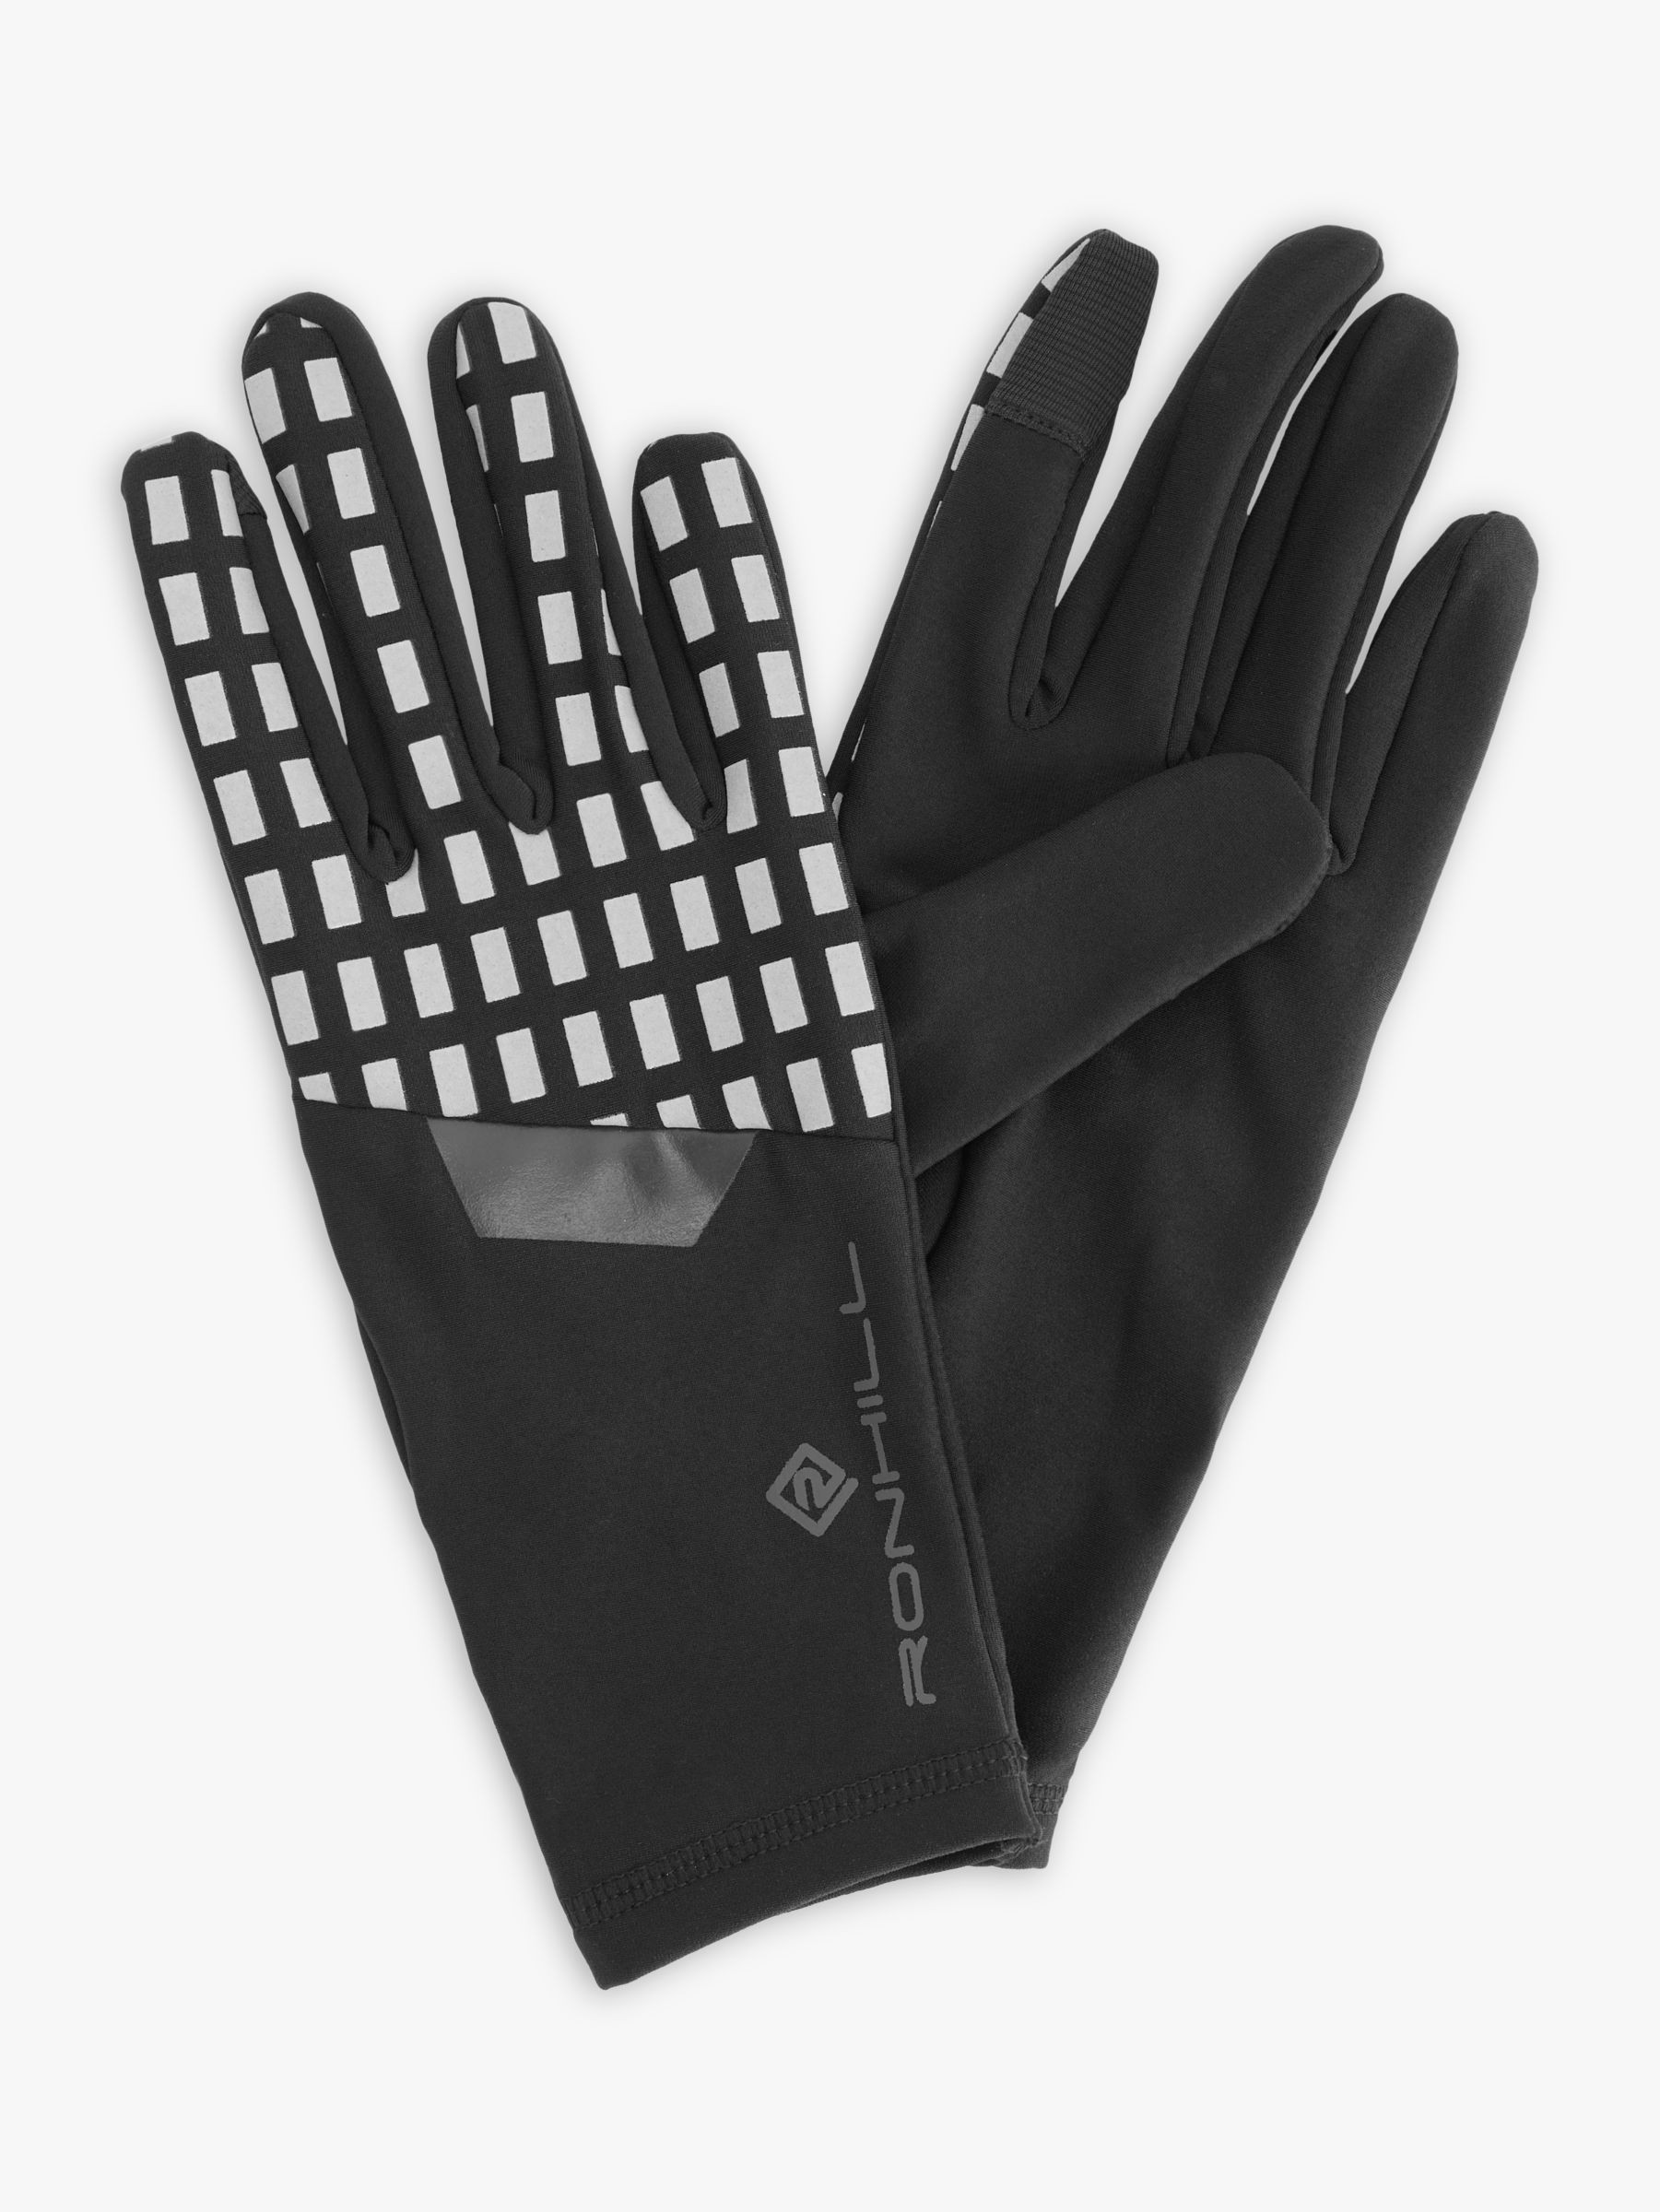 Ronhill Afterhours Running Gloves, Black/White/Reflective, S